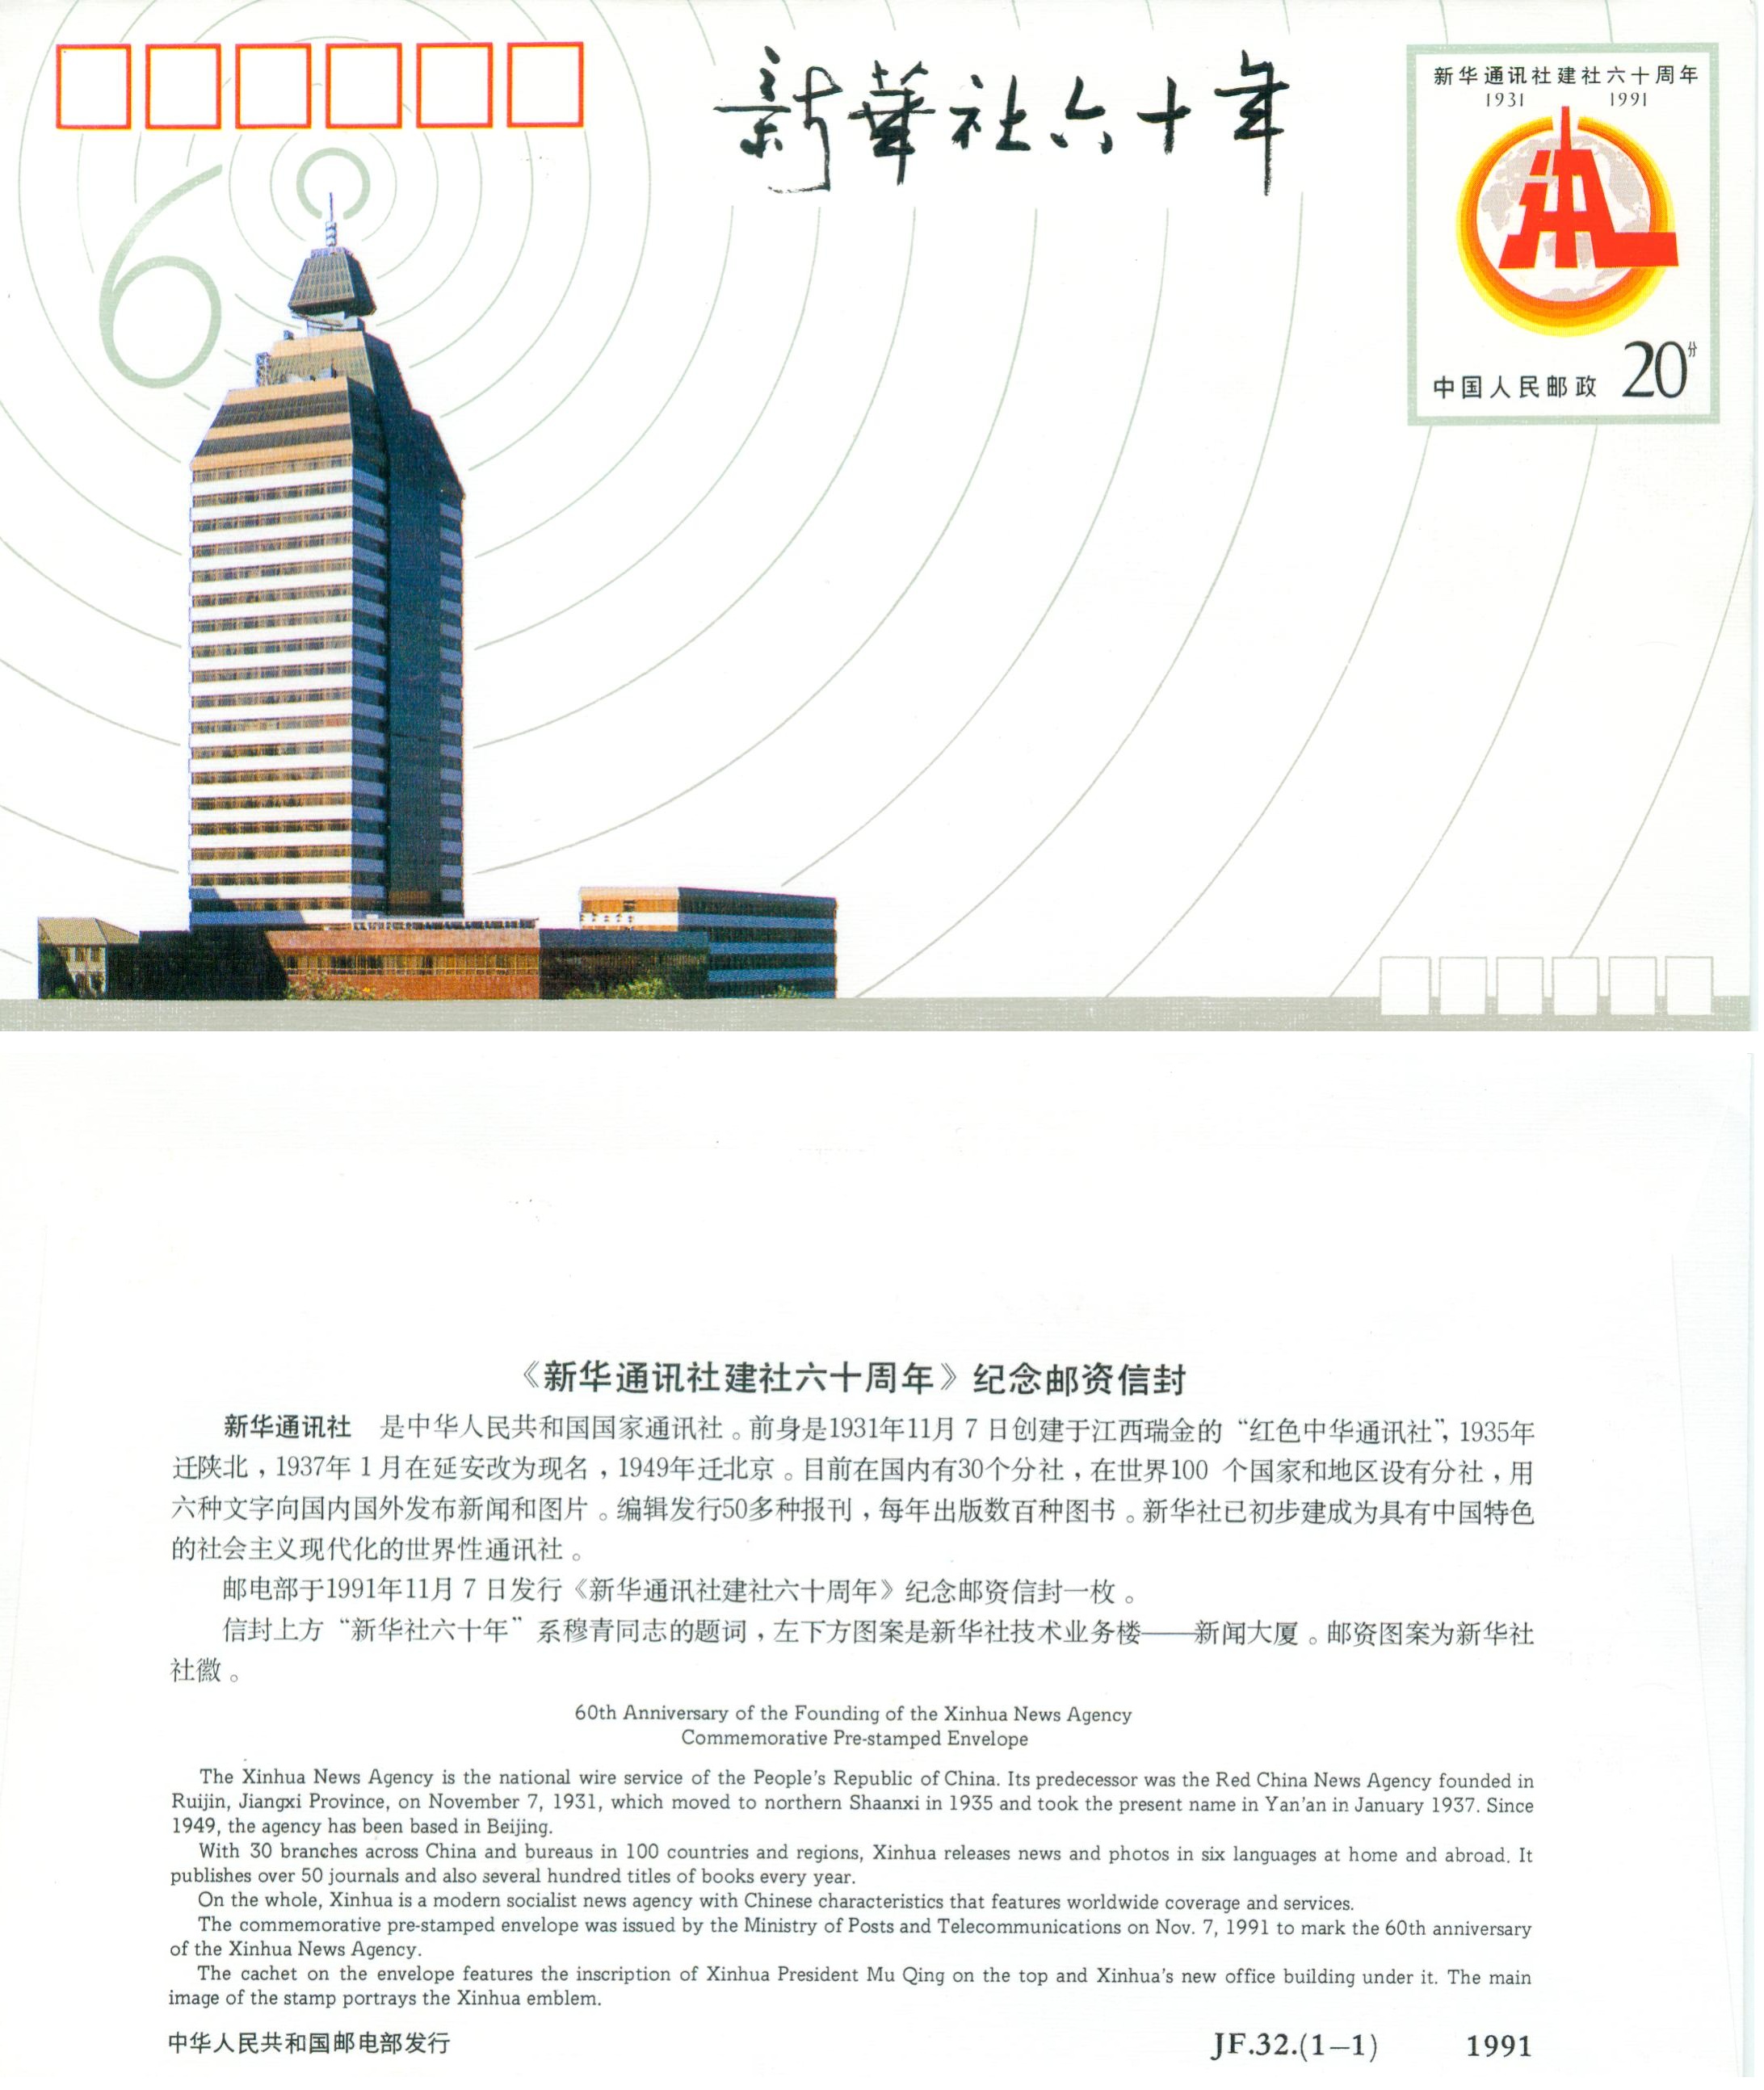 JF32, 60th Anniversary of the Founding of the Xinhua News Agency 1991